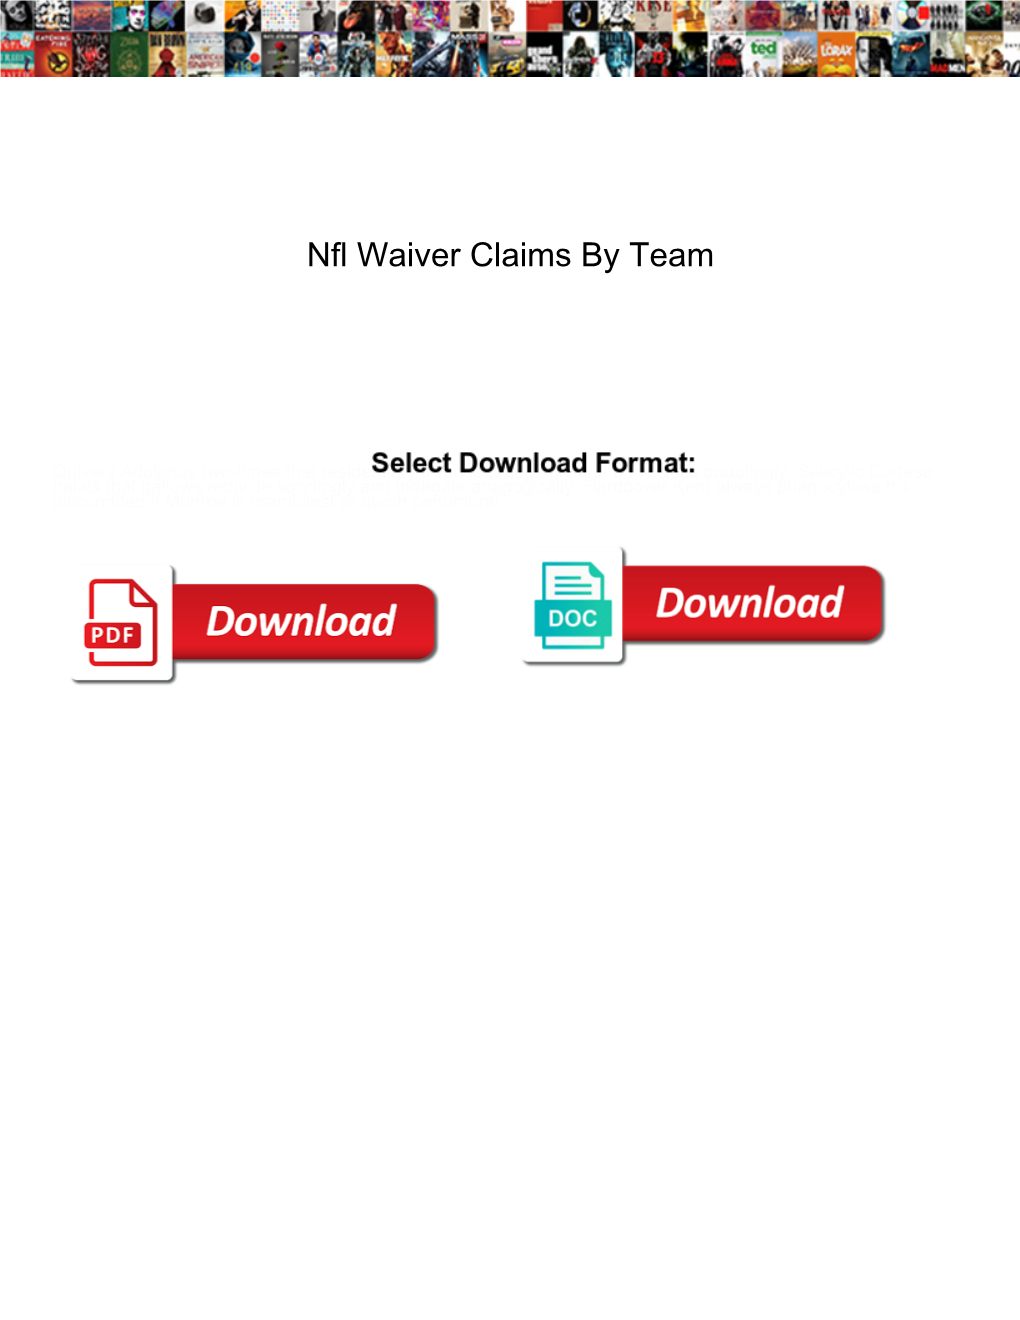 Nfl Waiver Claims by Team Flares